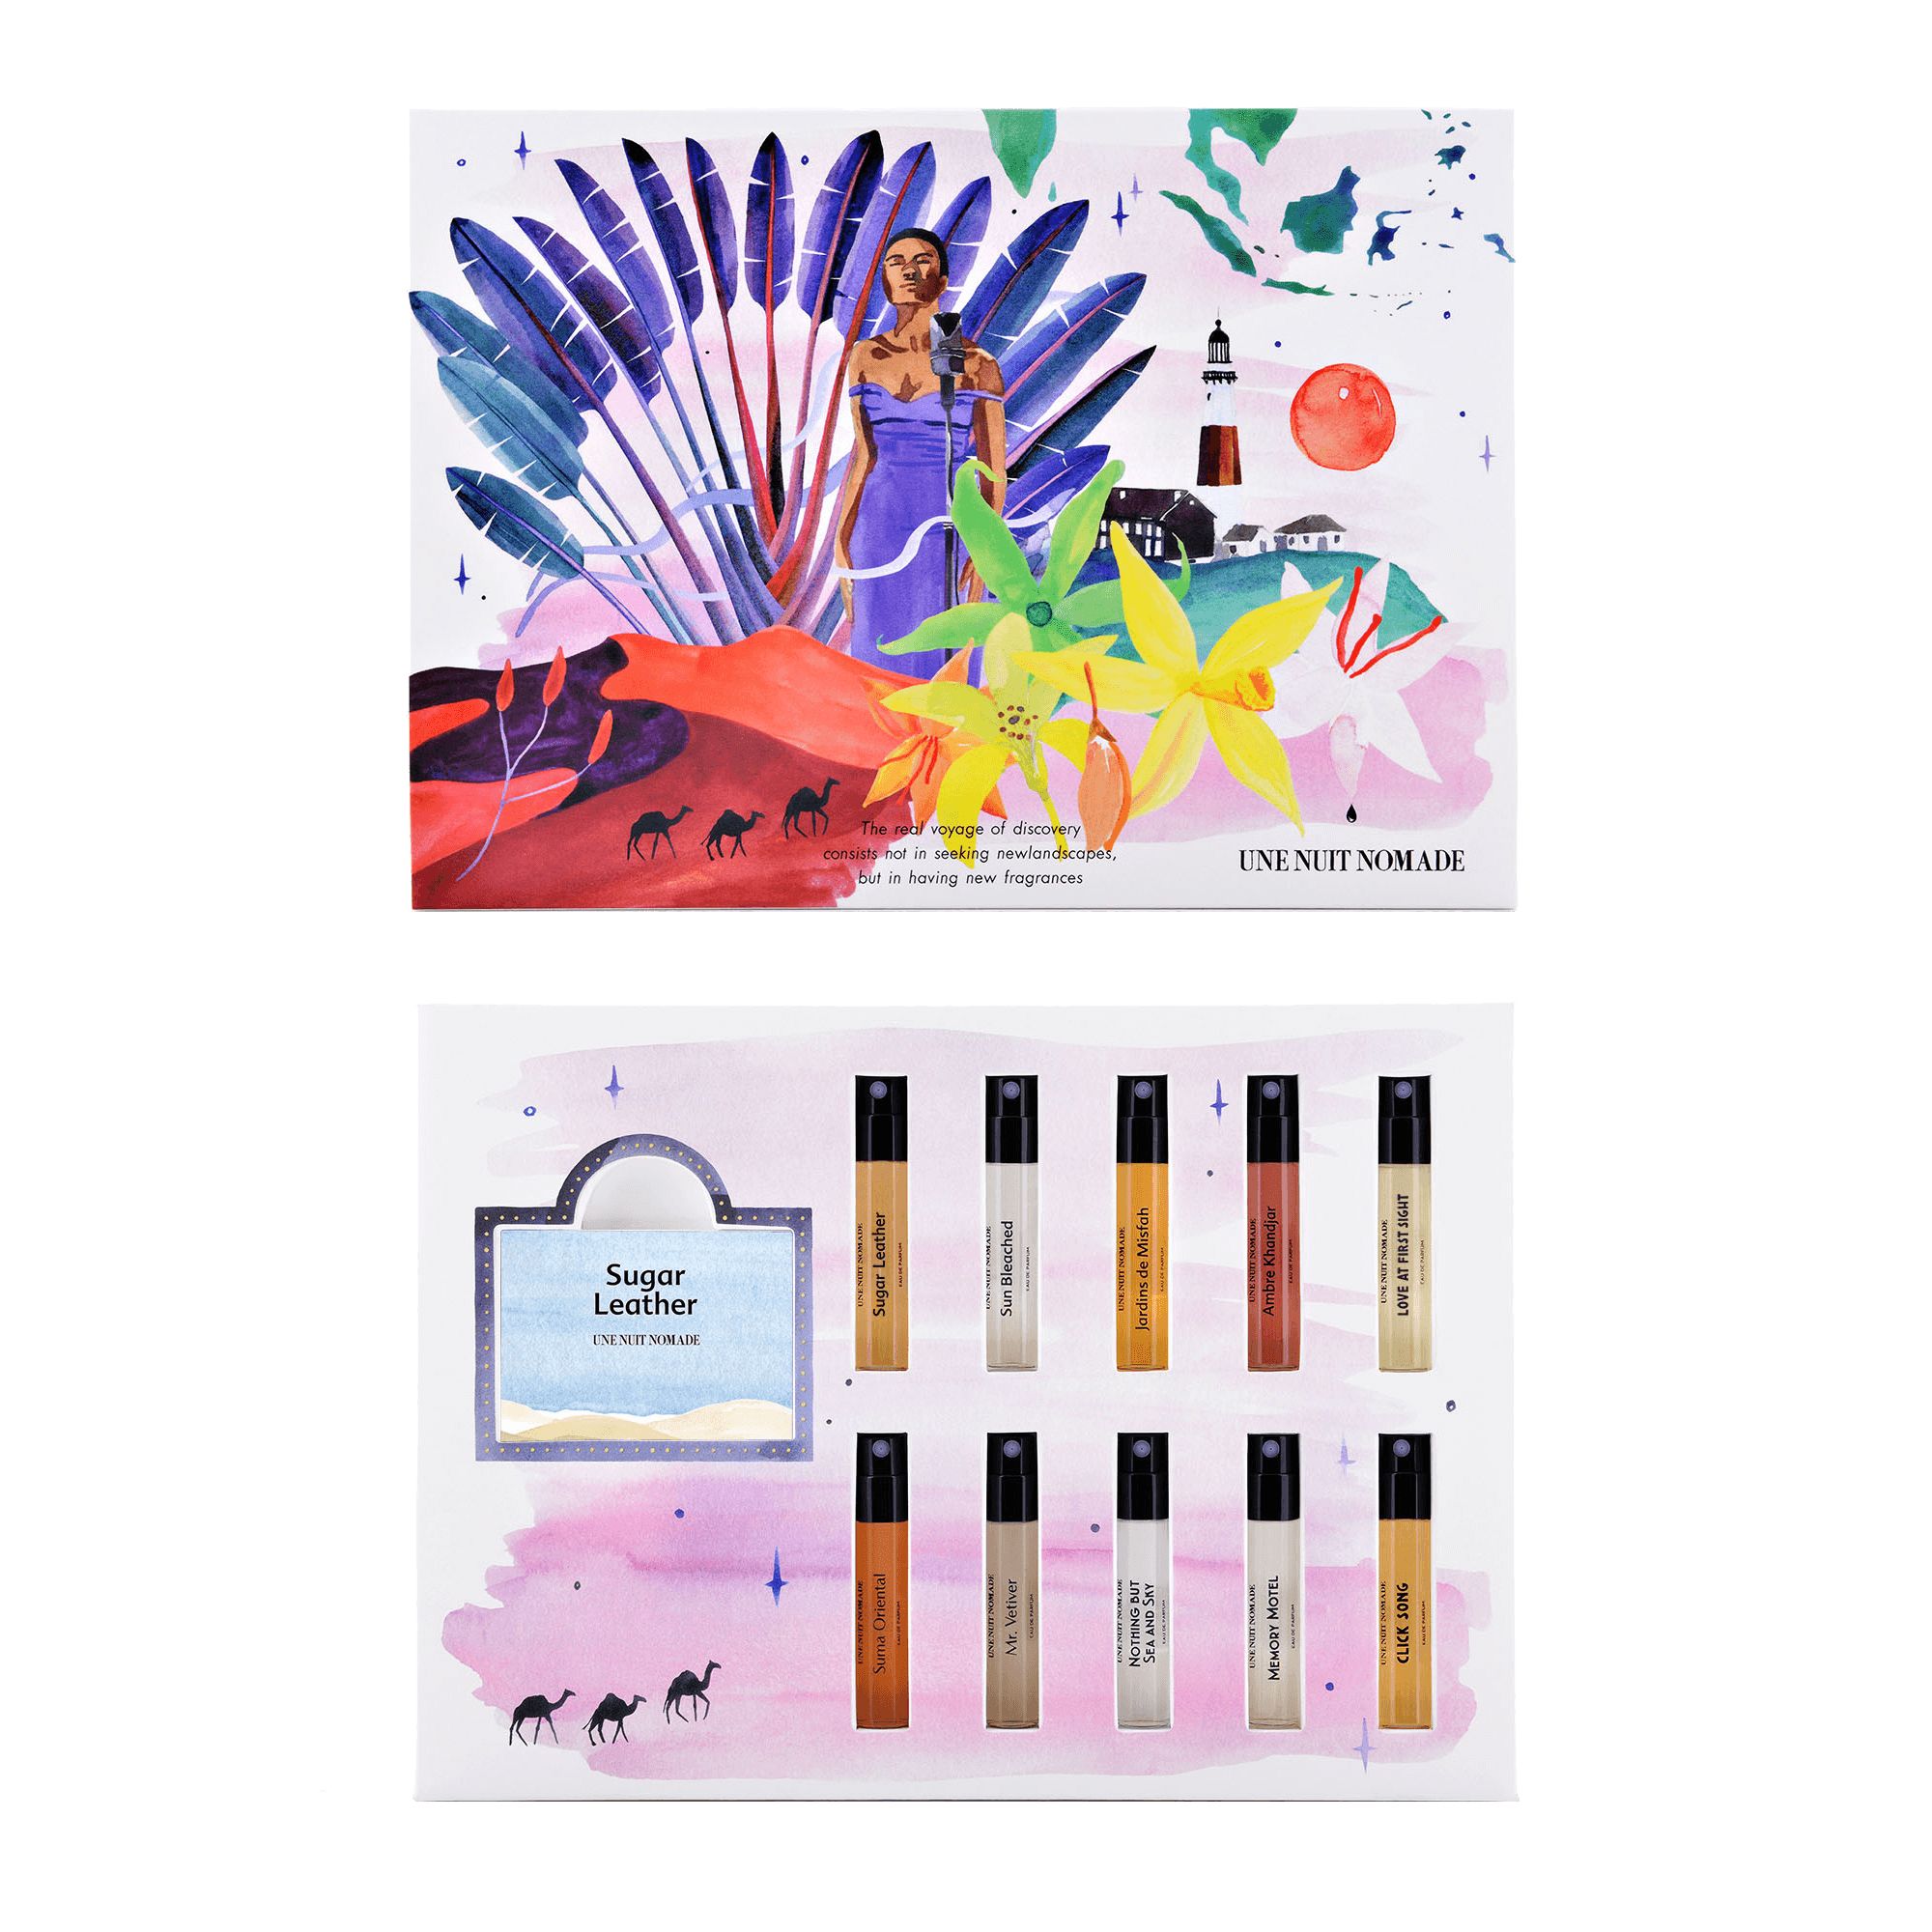 Une Nuit Nomade Discovery Kit for $50.00